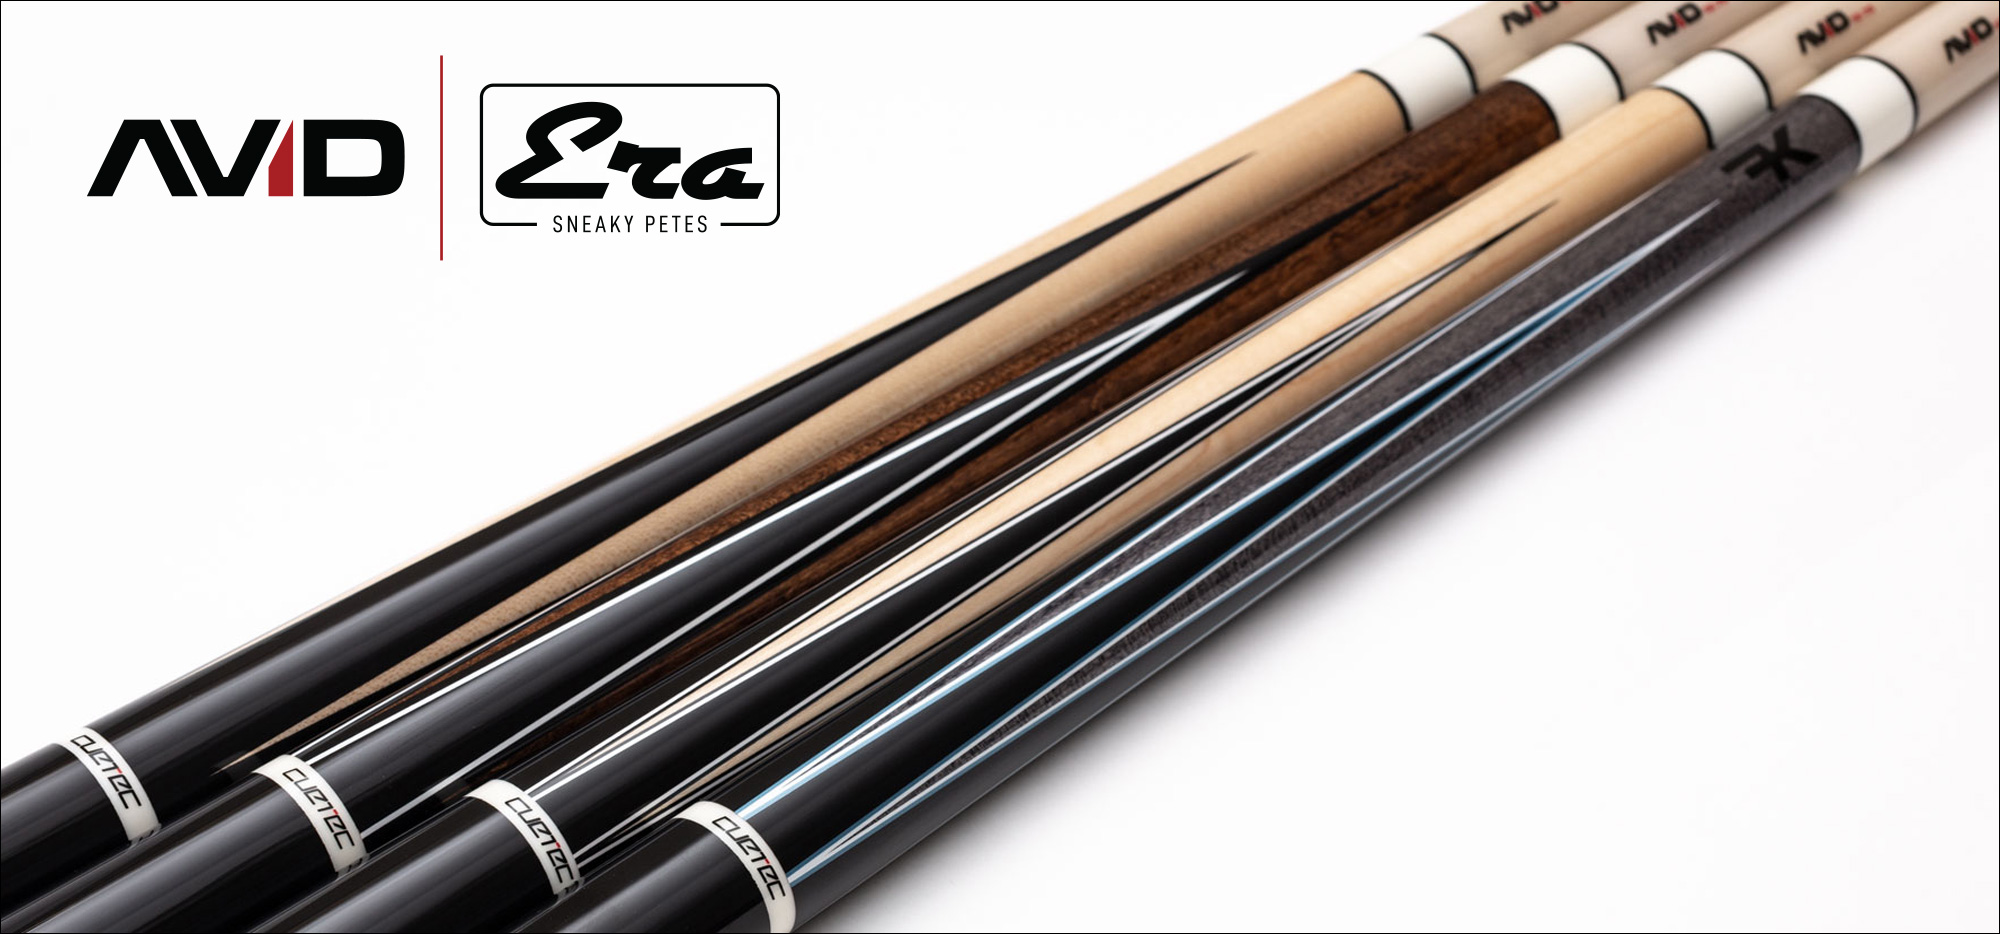 Details about   Cuetec AVID Era 95-322NW Sneaky Pete 4Point Brown Pool Cue w/ Many 